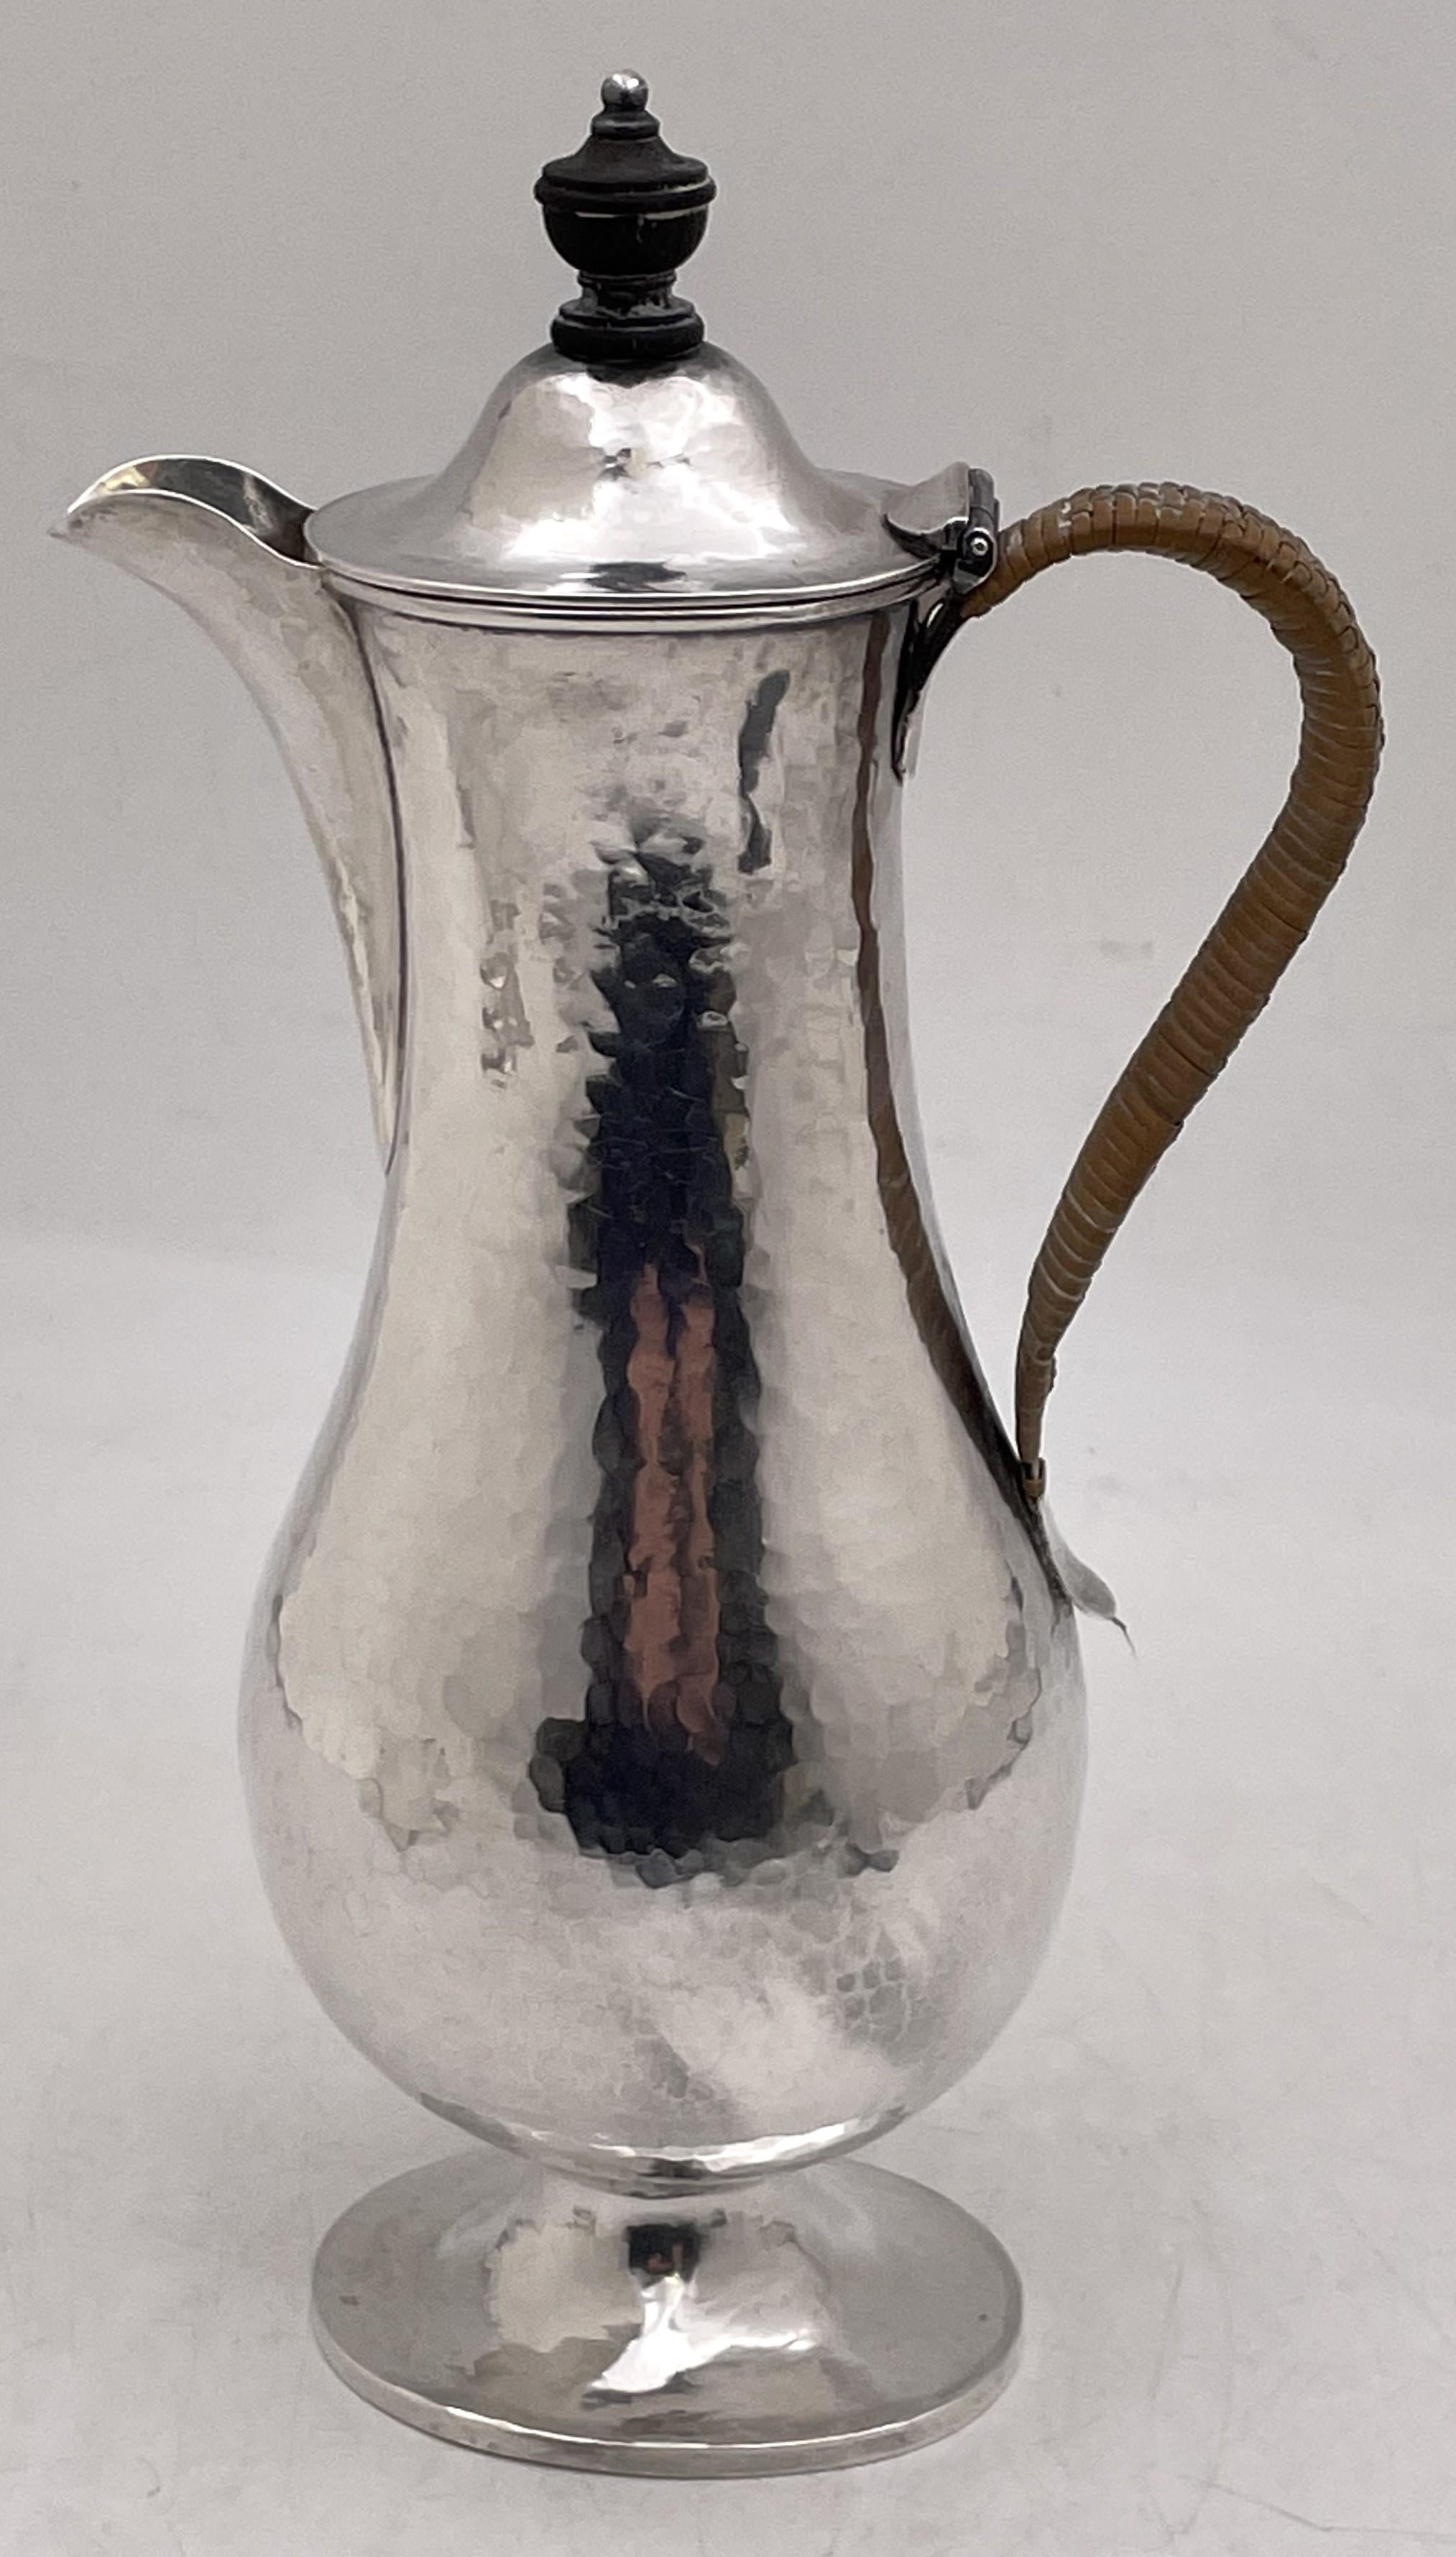 Crichton, English sterling silver coffee pot from 1896, beautifully hand-hammered, and in Arts & Crafts style with an elegant design. It measures 10'' in height by 5 1/8'' from handle to spout, weighs 11 troy ounces, and bears hallmarks as shown.